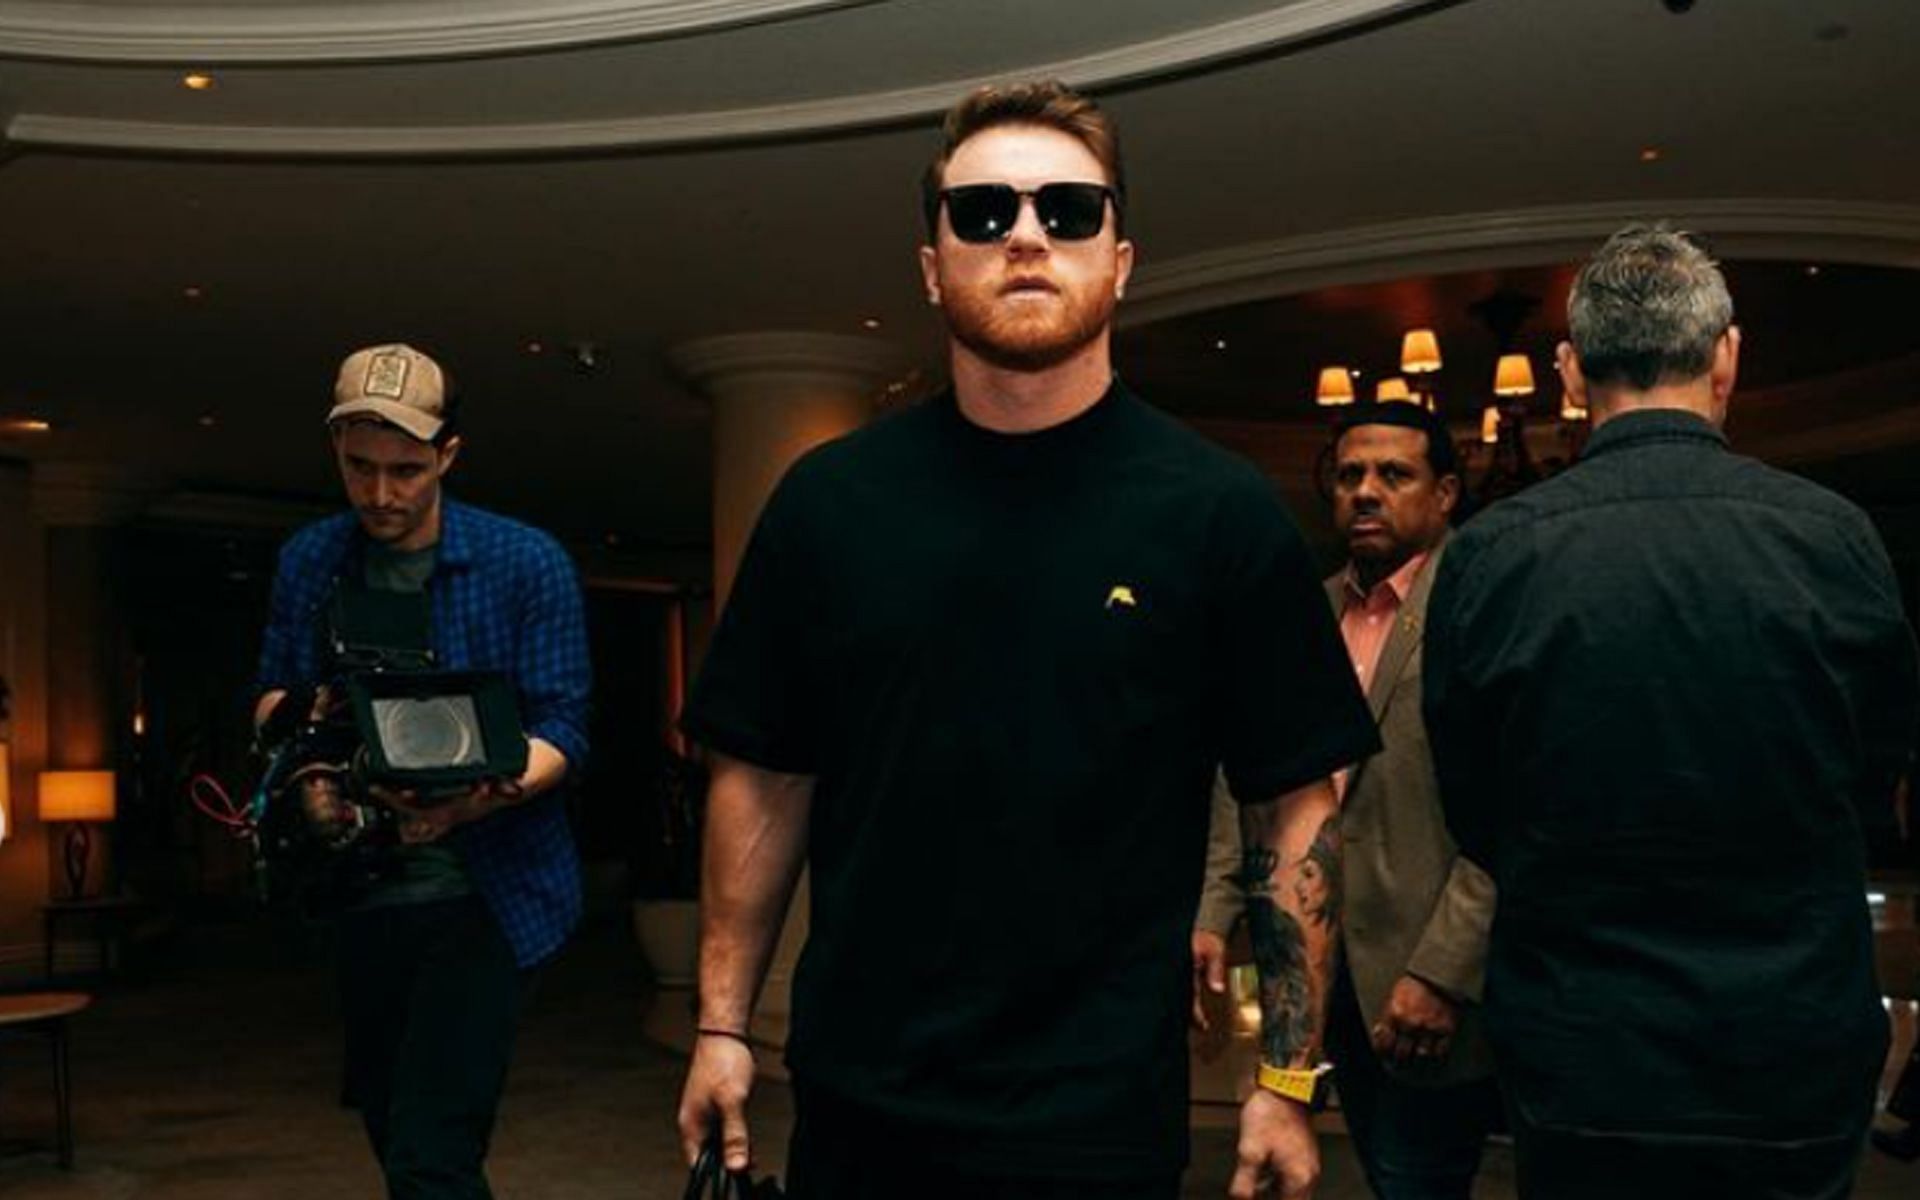 Linguistic barriers have not stopped Canelo Alvarez from becoming a global boxing icon [Image Courtesy: @canelo Instagram]